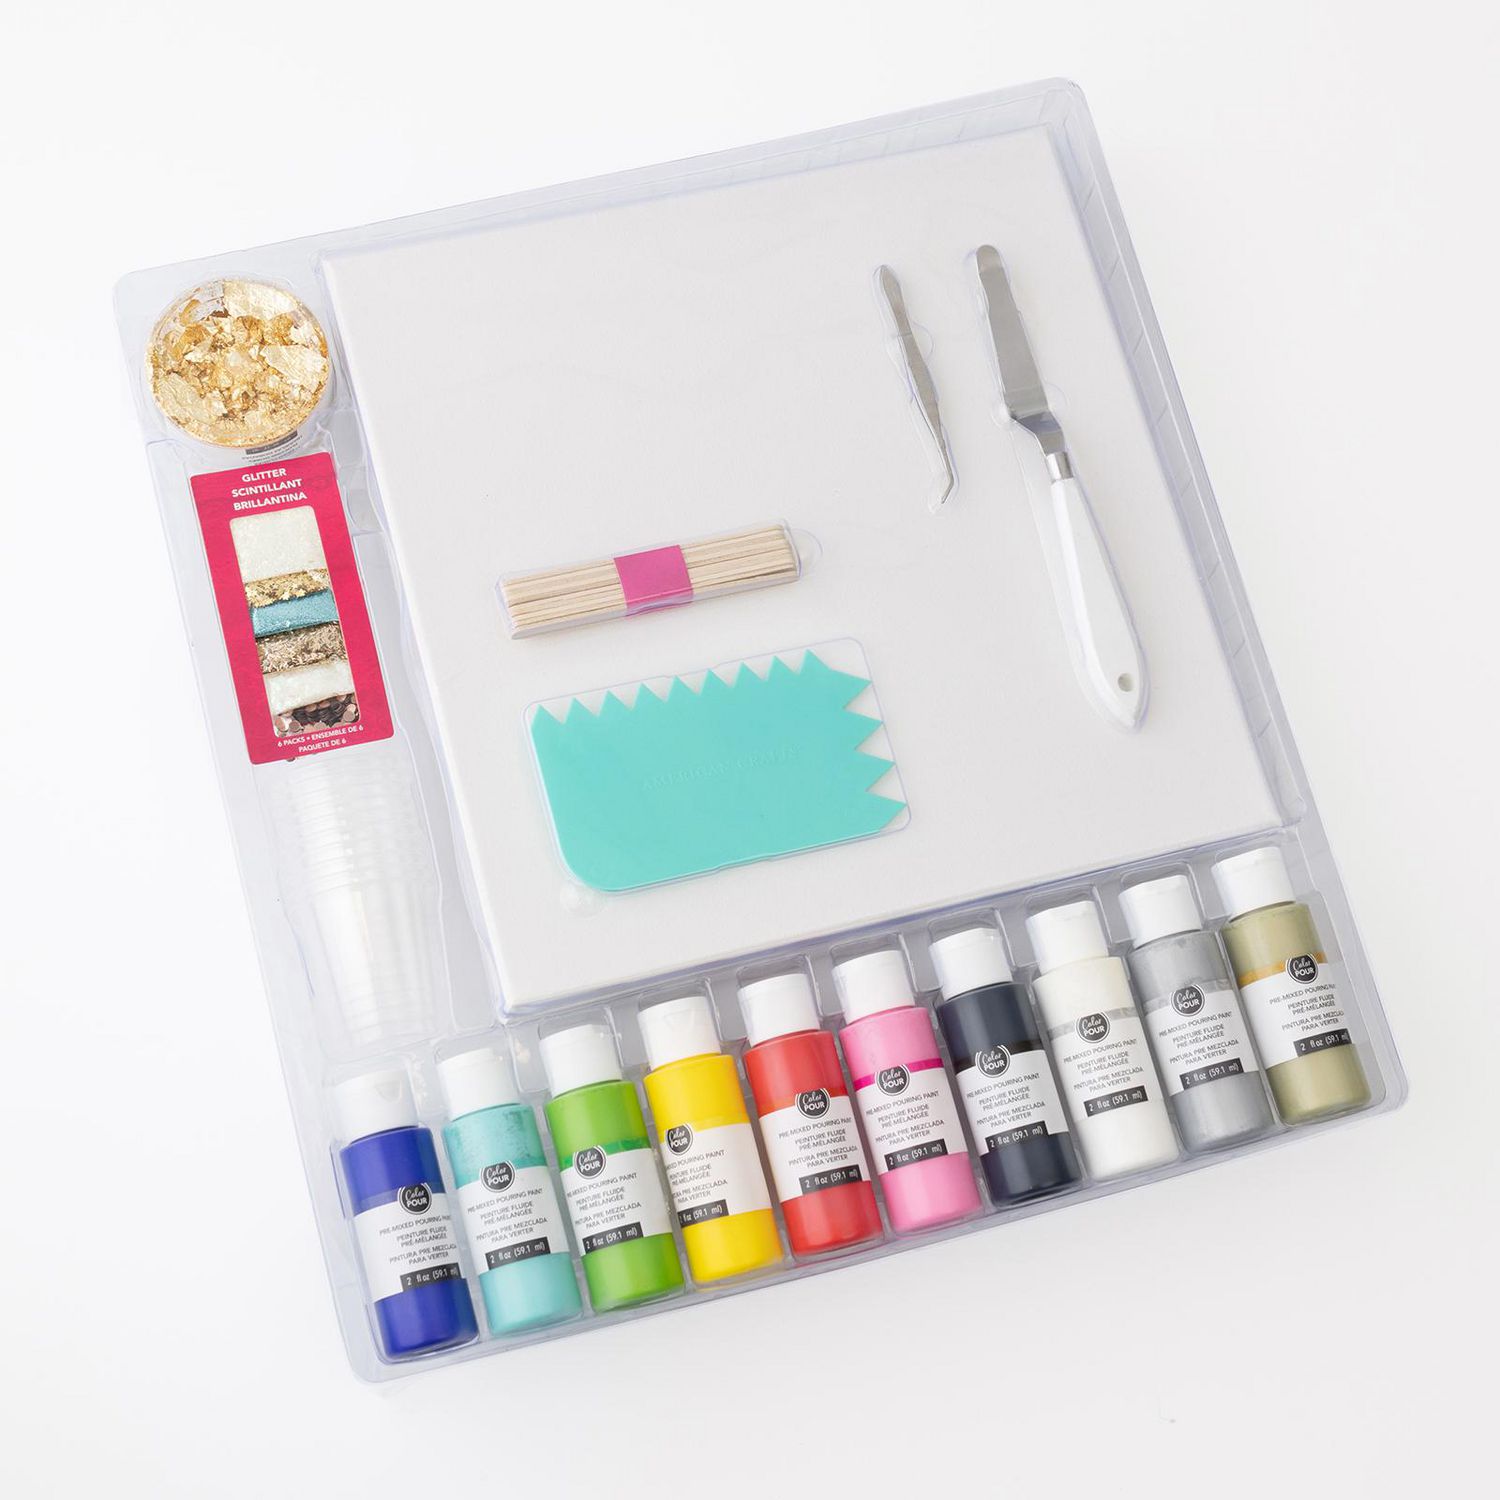 American Crafts Color Pour Pre Mixed Starter Kit